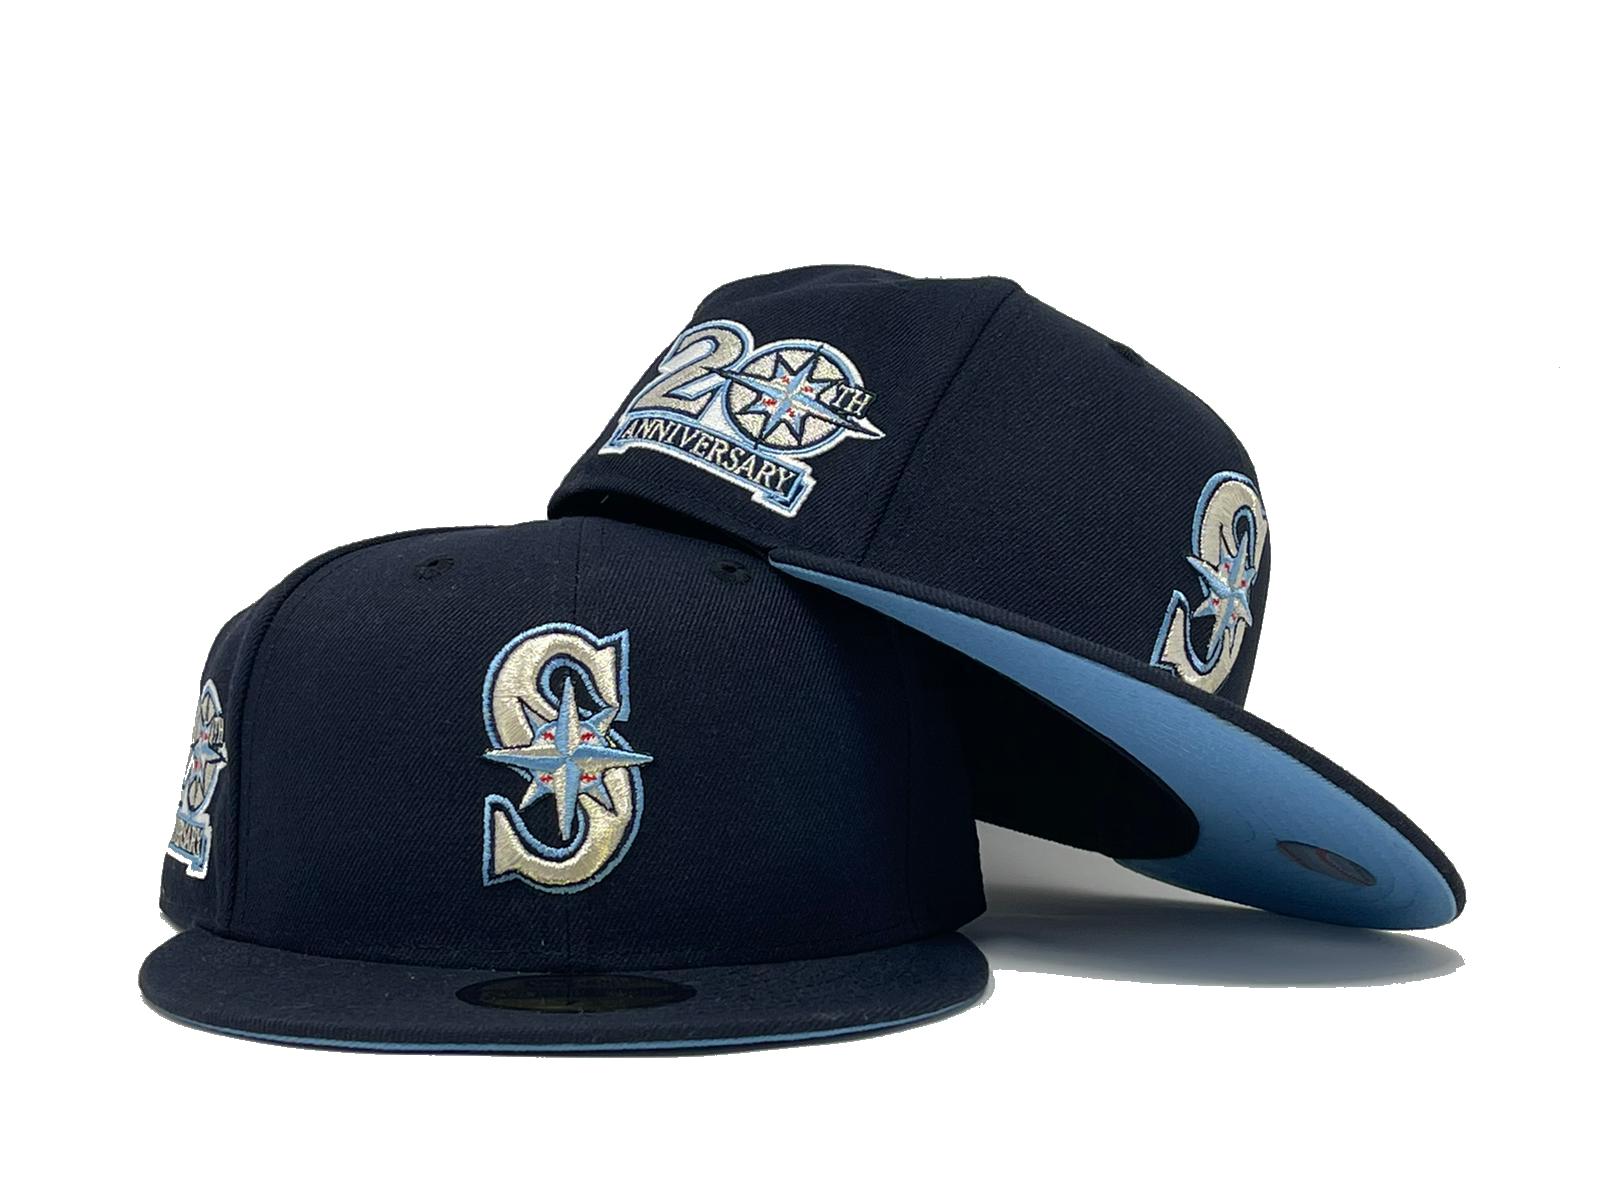 New Era Throwback Cord 17208 Seattle Mariners Hat - Navy